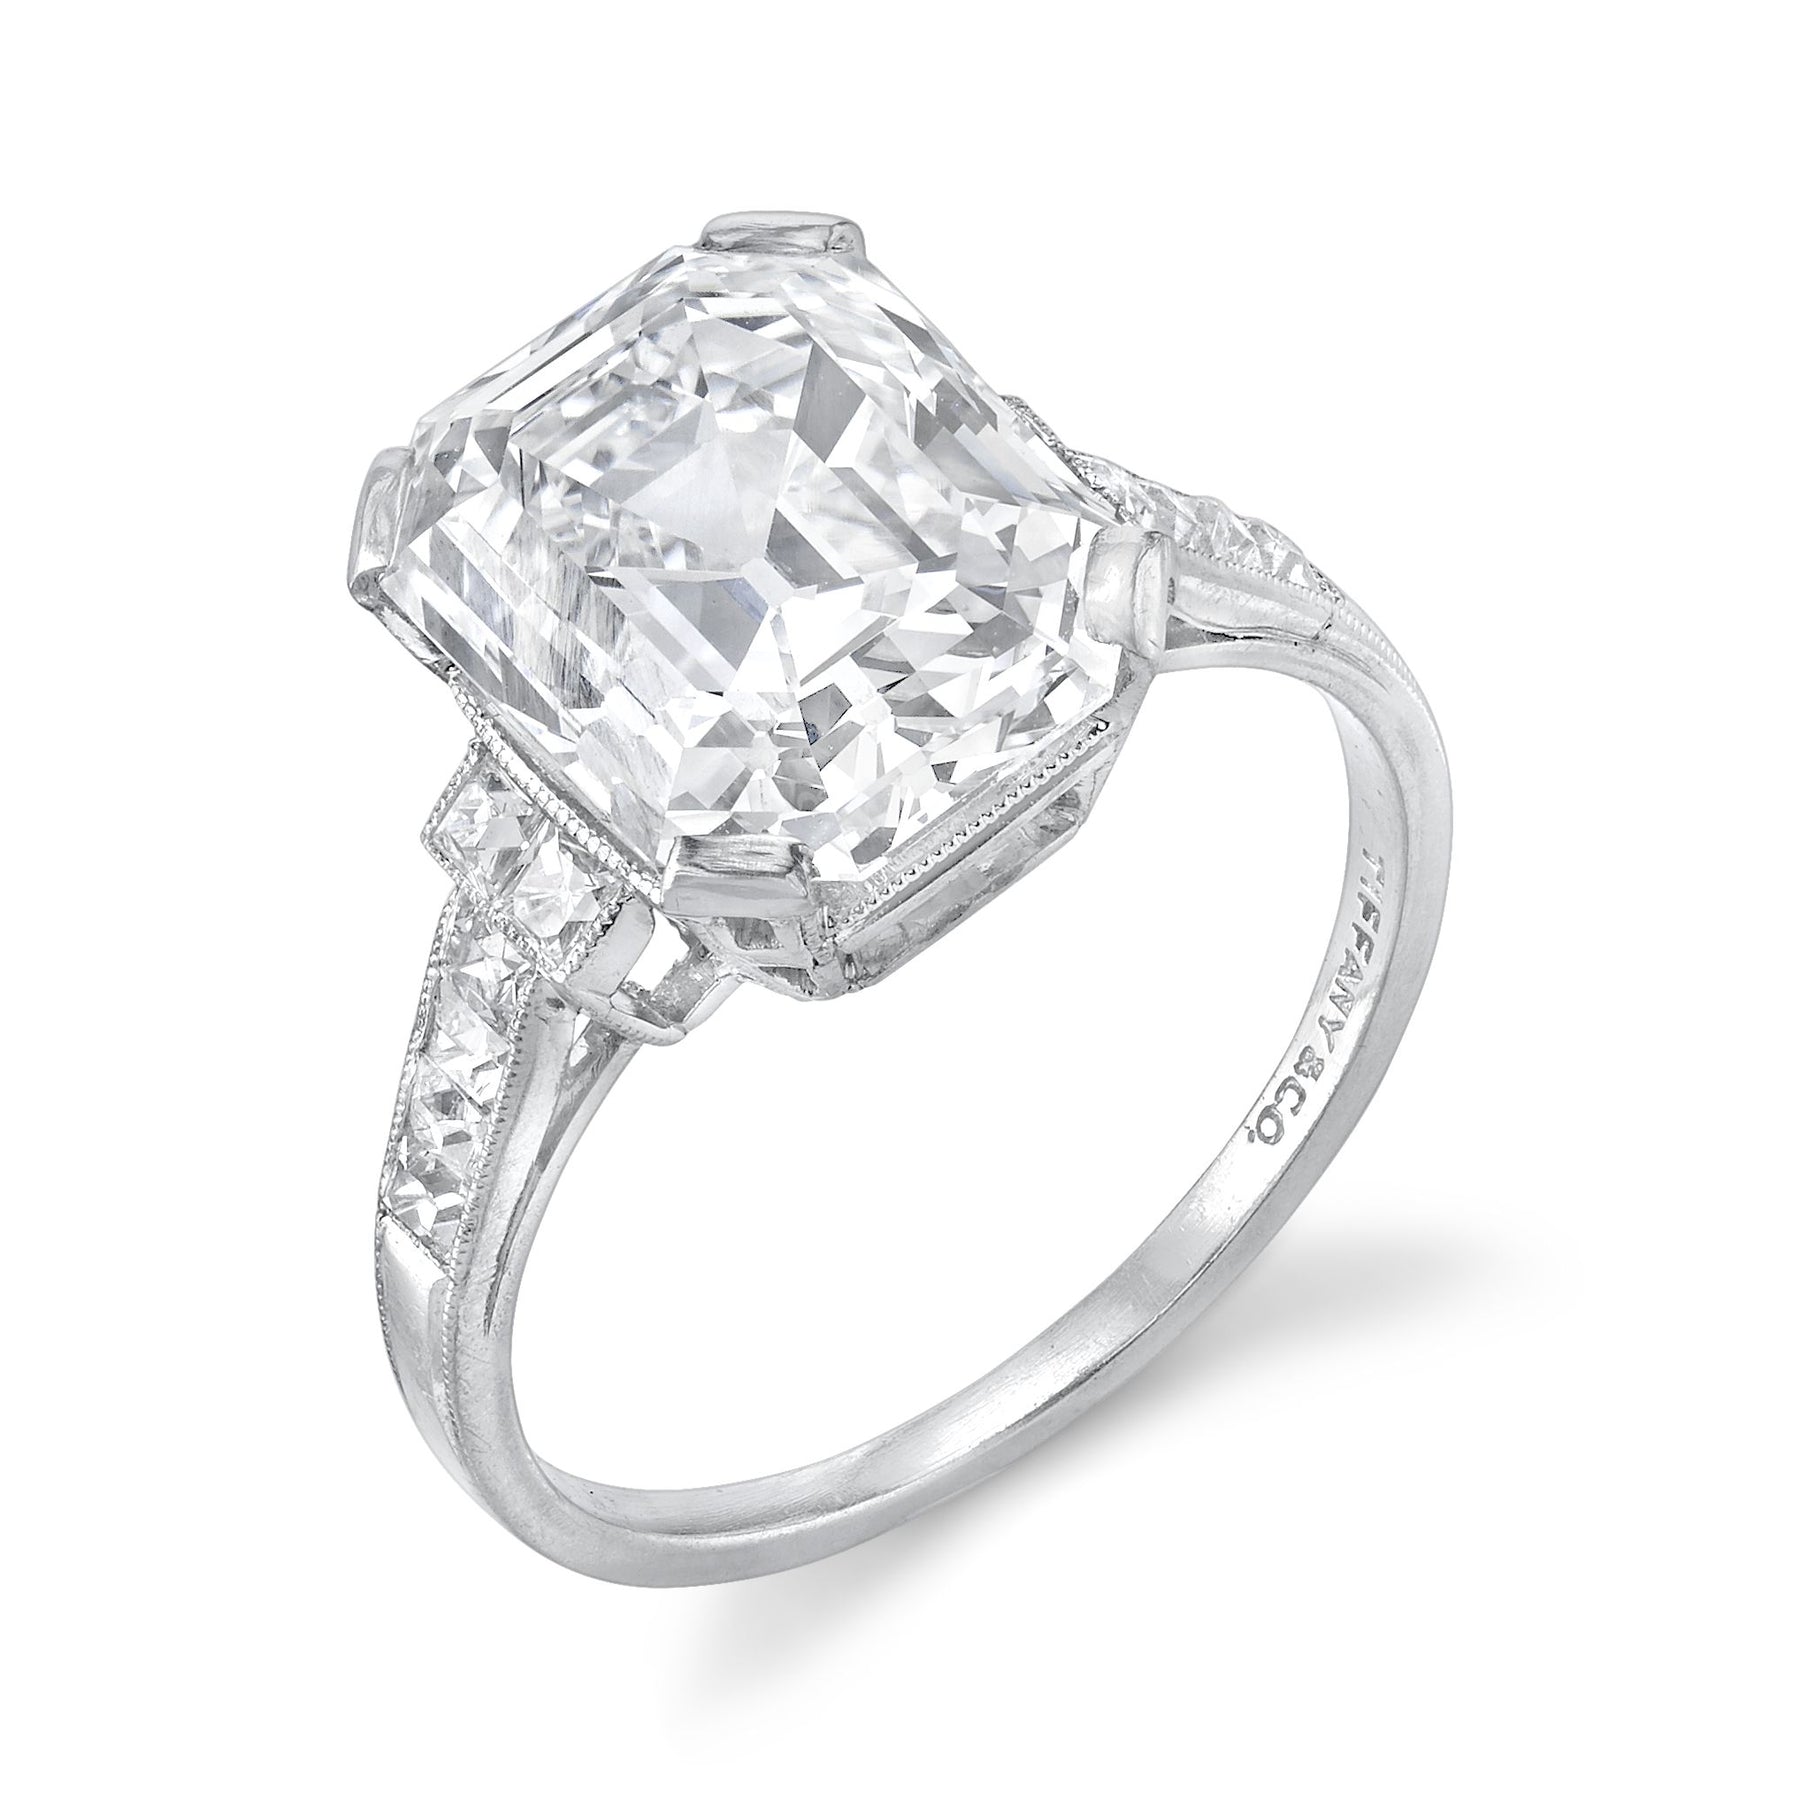 Tiffany & Co. Emerald Cut Diamond Solitaire Engagement Ring | Pampillonia  Jewelers | Estate and Designer Jewelry